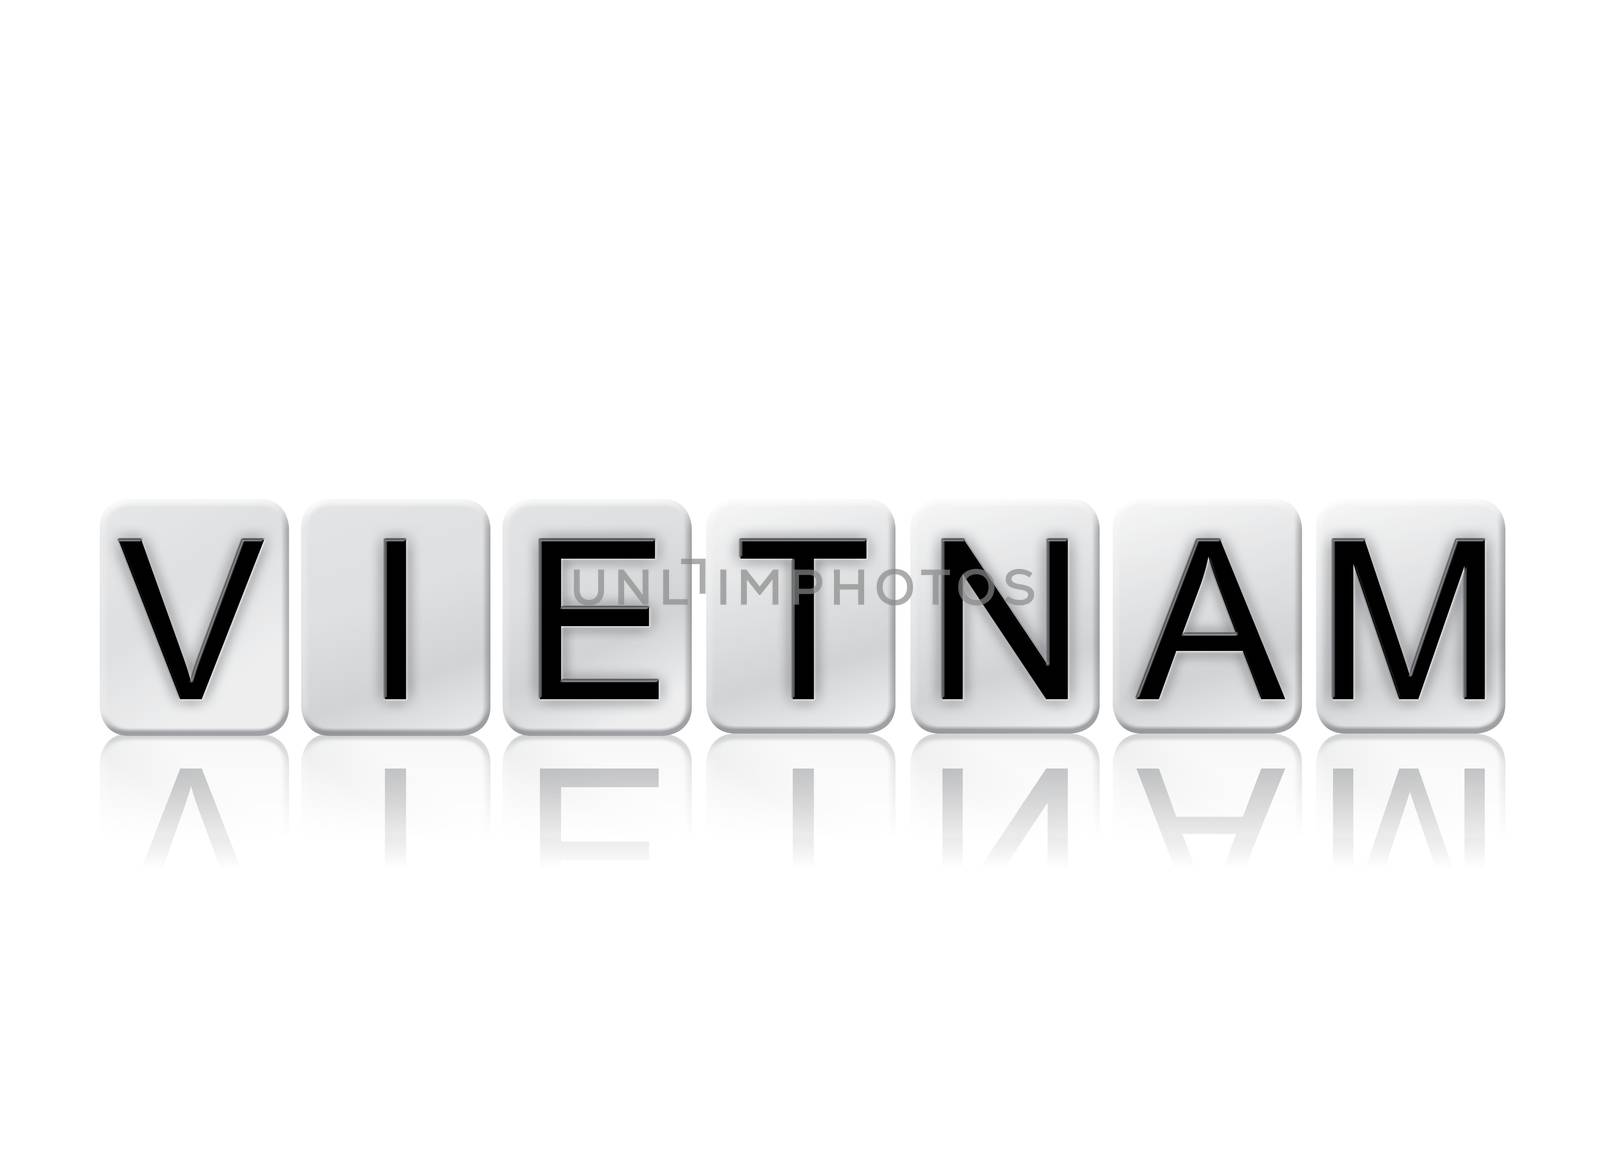 Vietnam Isolated Tiled Letters Concept and Theme by enterlinedesign